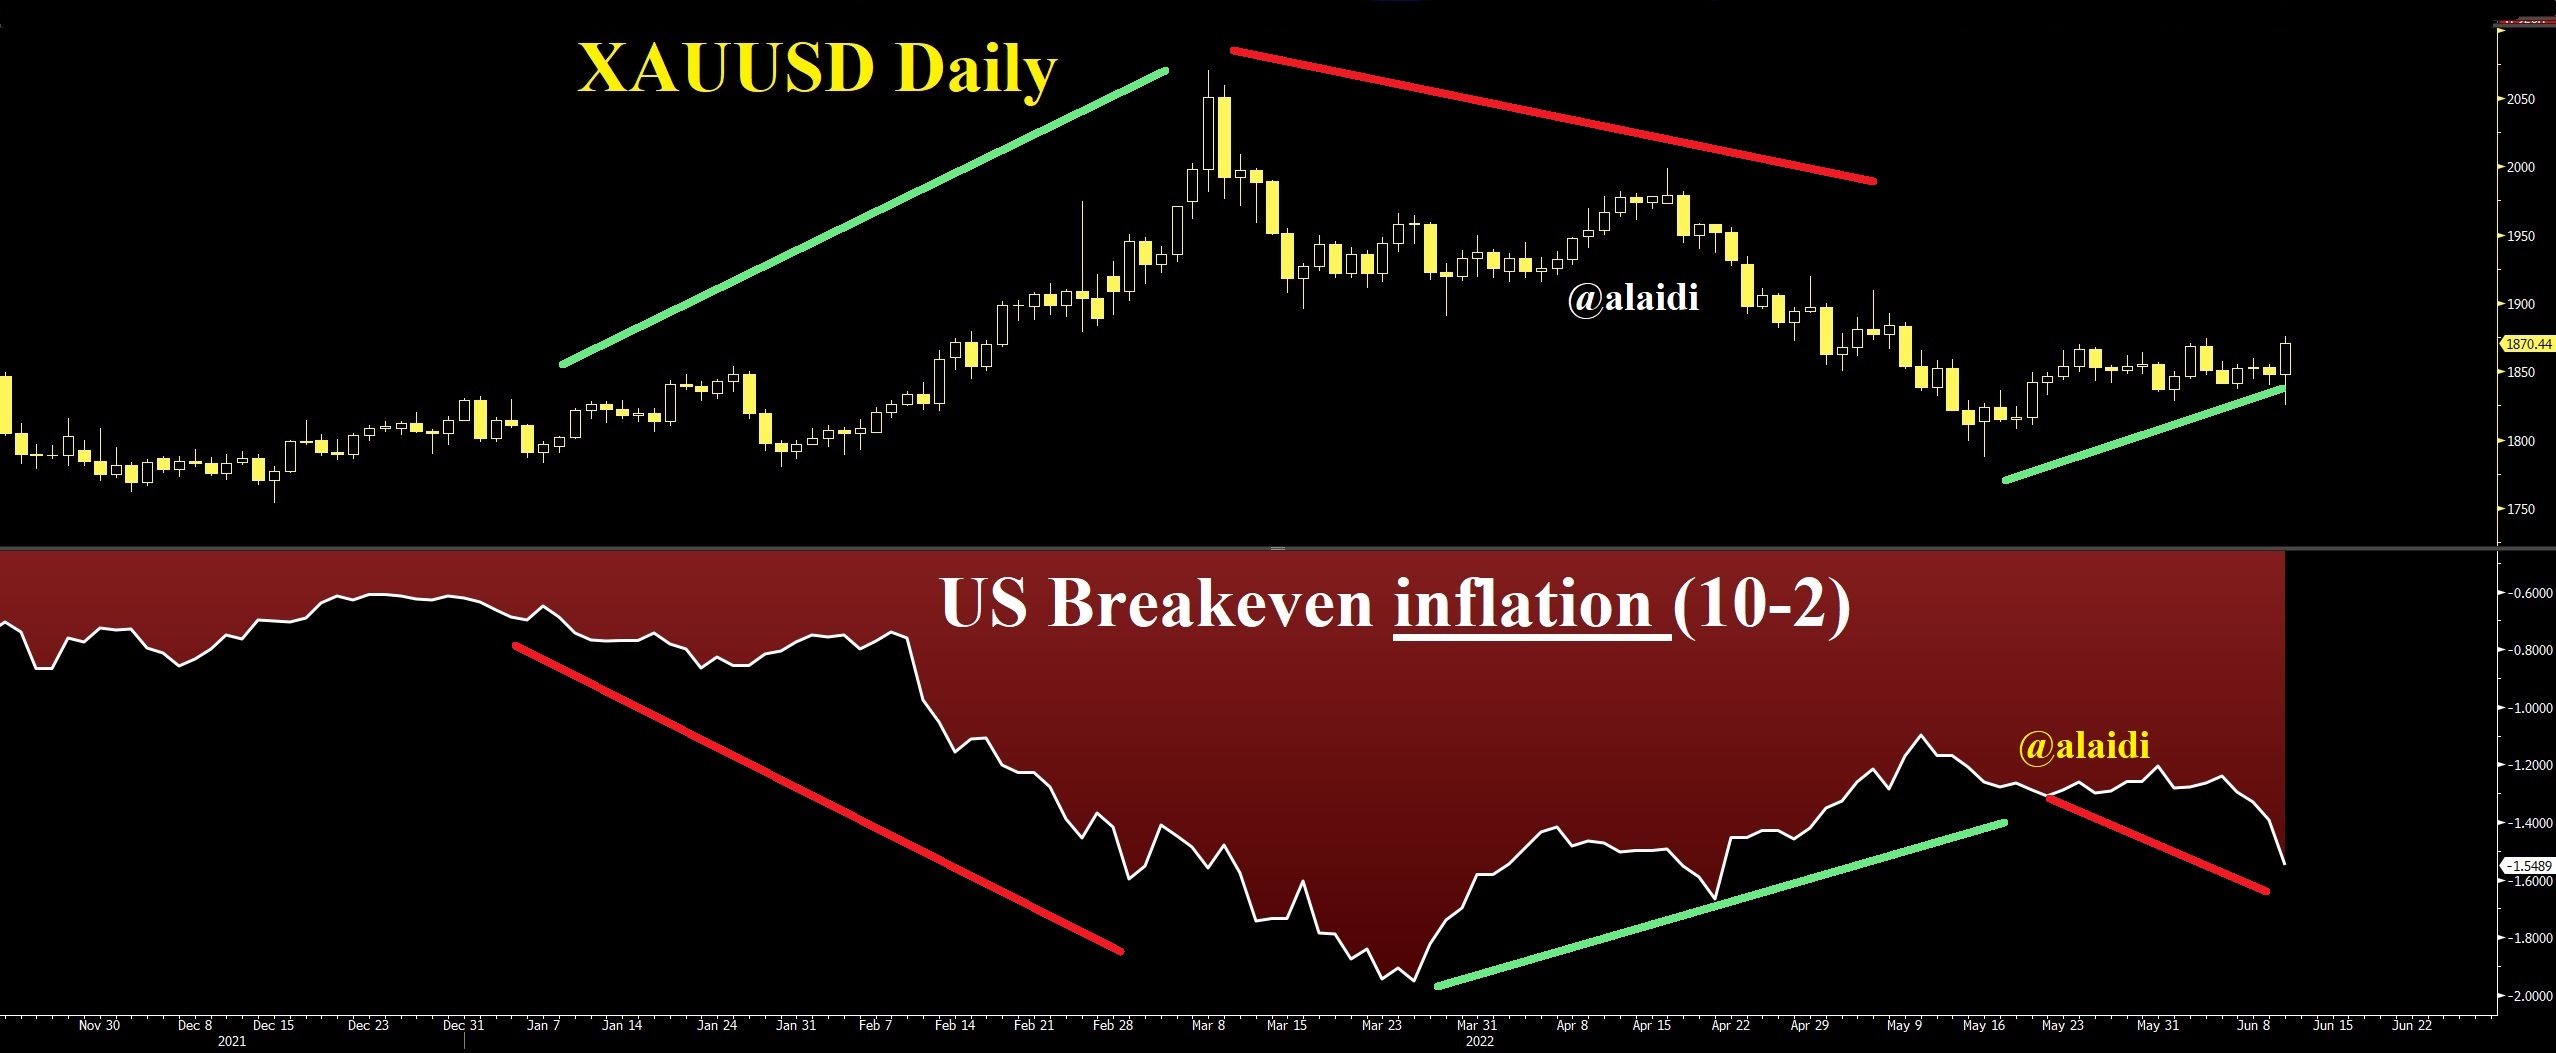 XAU/USD And US Breakeven Inflation Chart